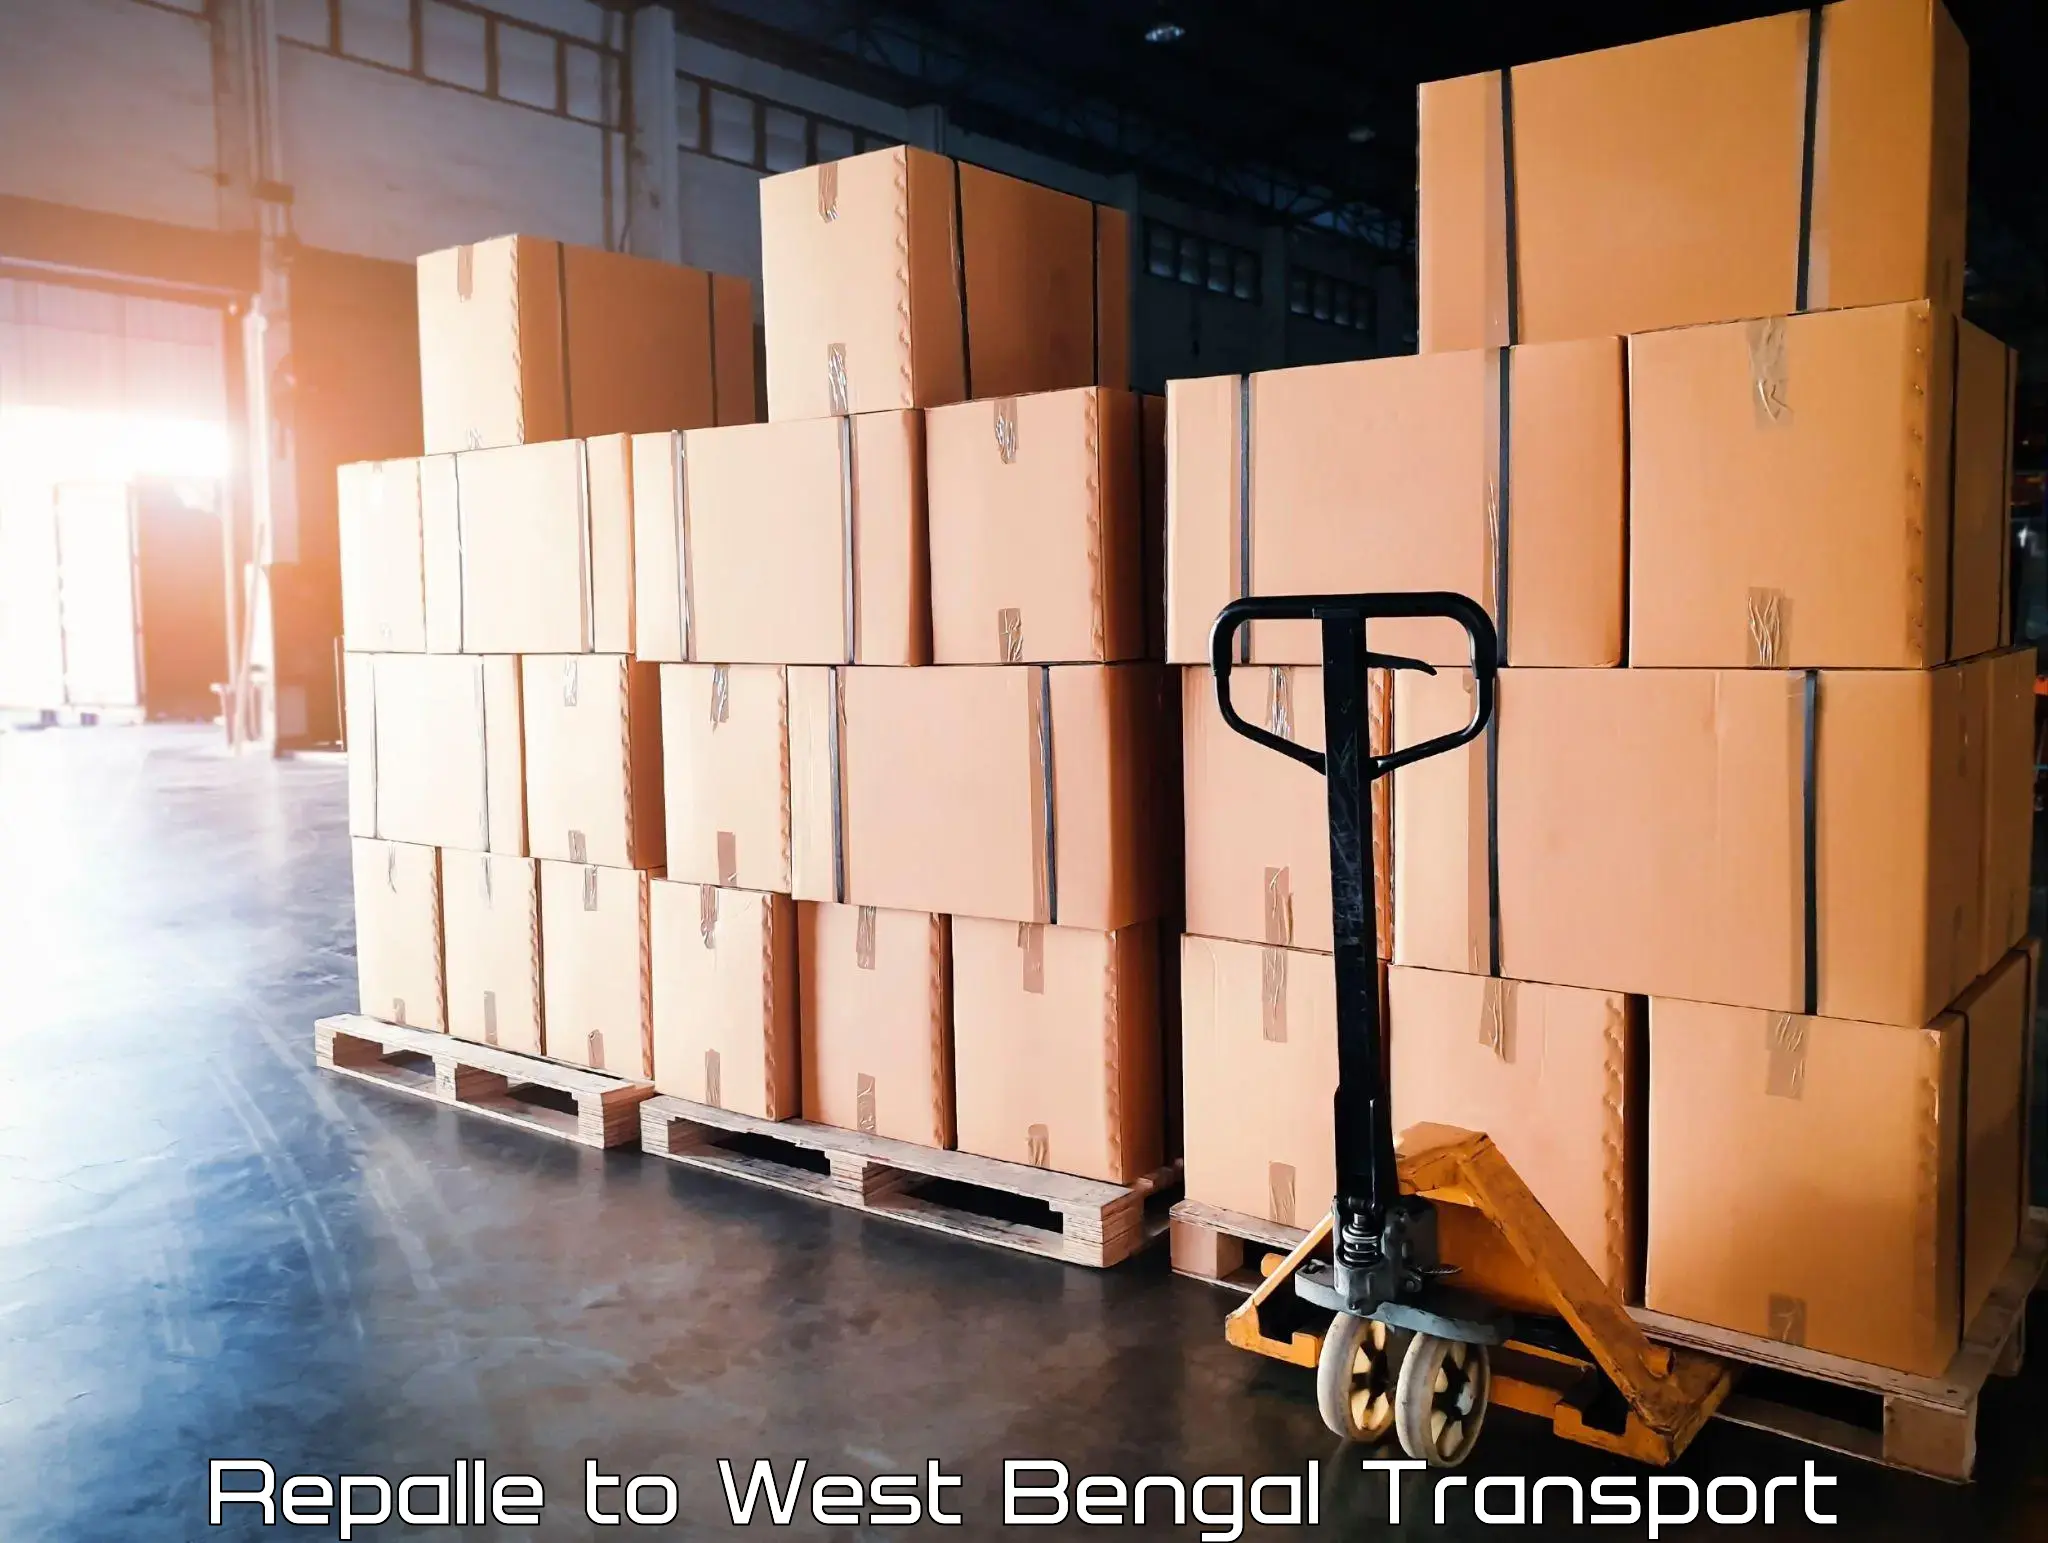 Nearby transport service Repalle to West Bengal